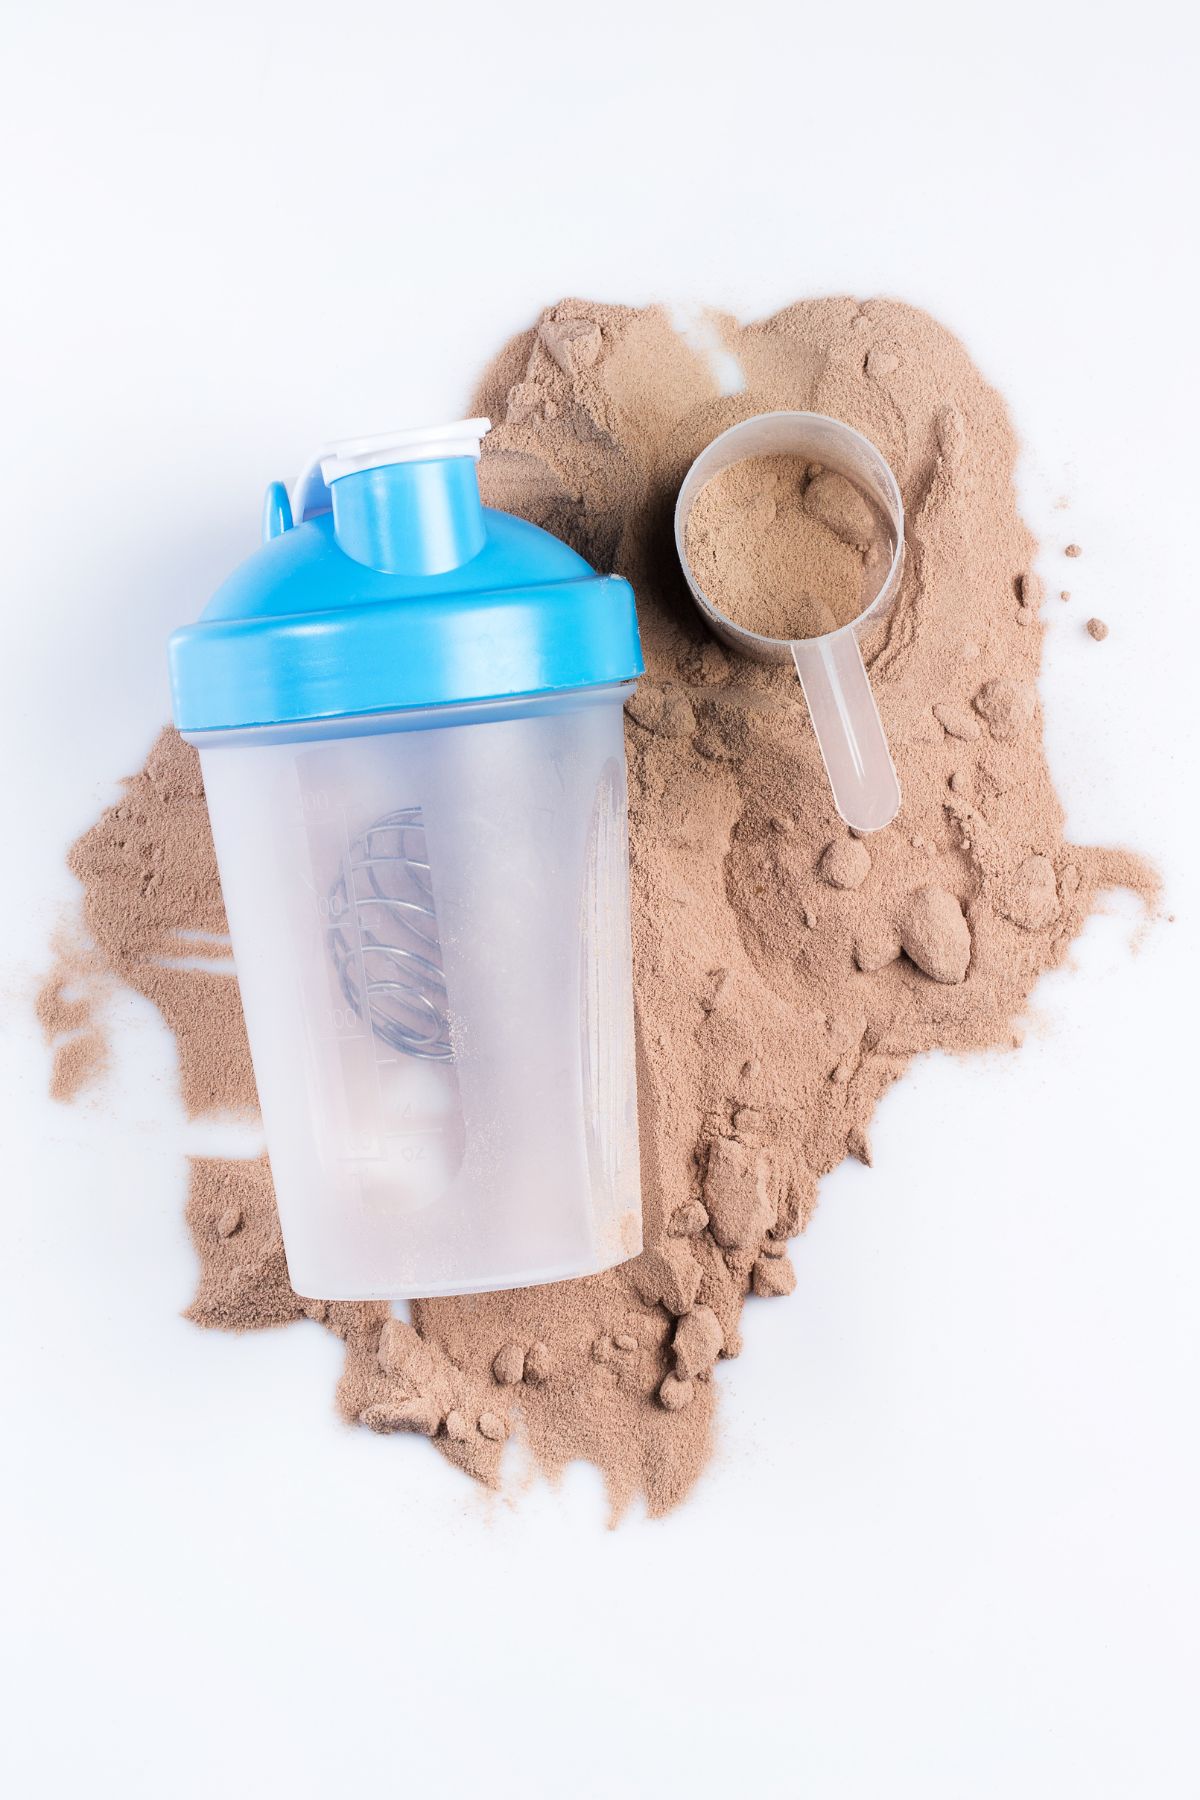 a shaker bottle and a scoop of powder on top of a mound of protein powder.